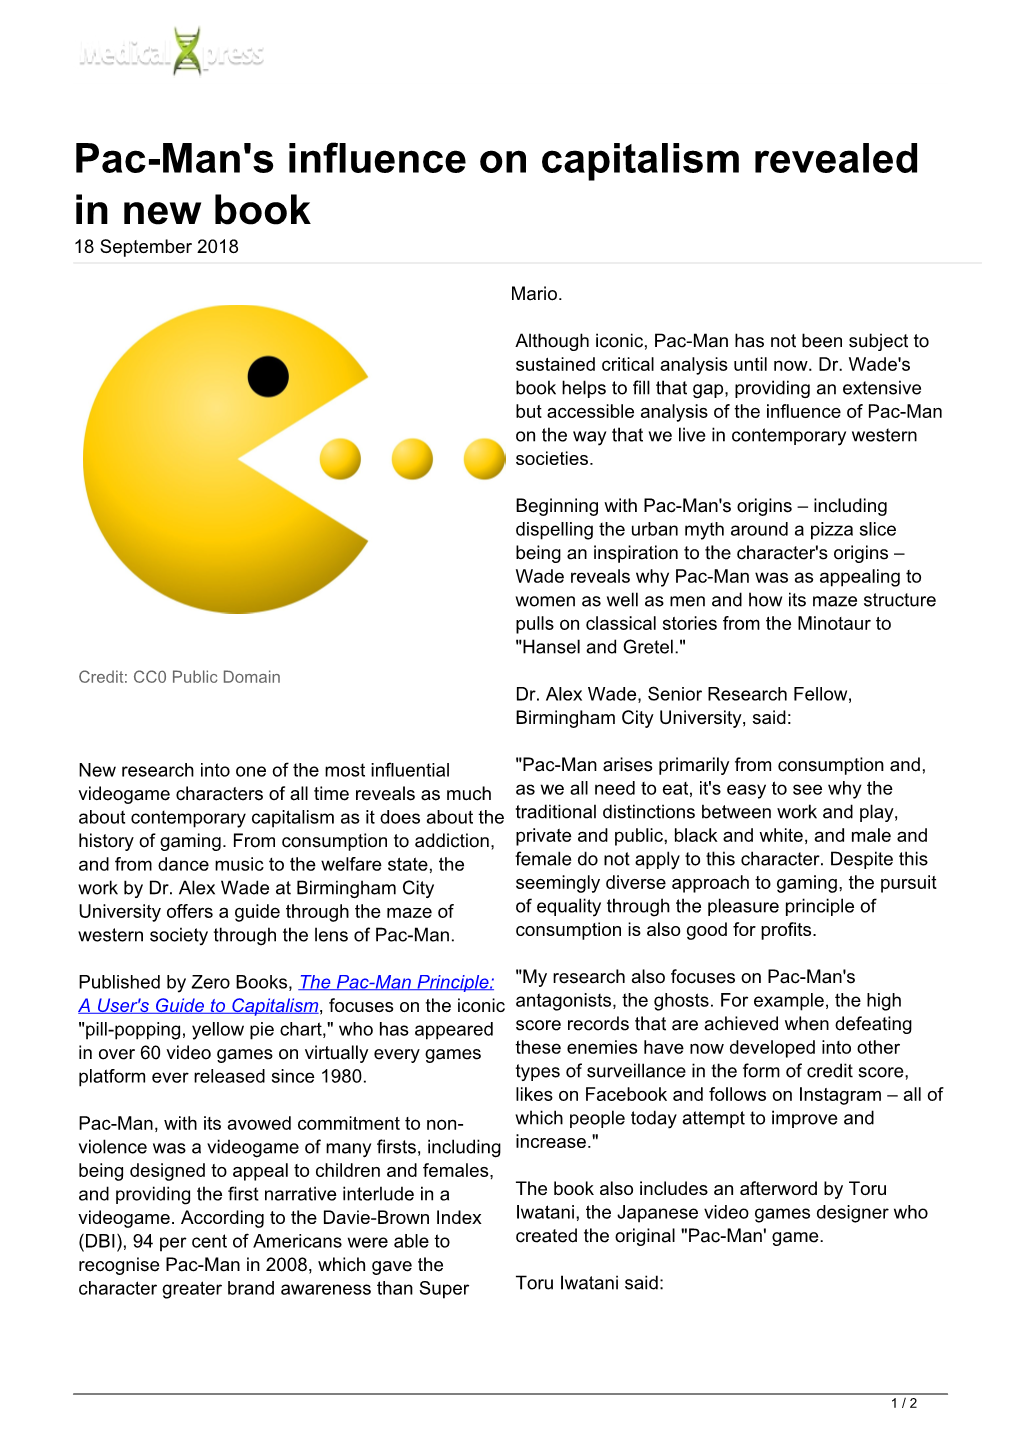 Pac-Man's Influence on Capitalism Revealed in New Book 18 September 2018